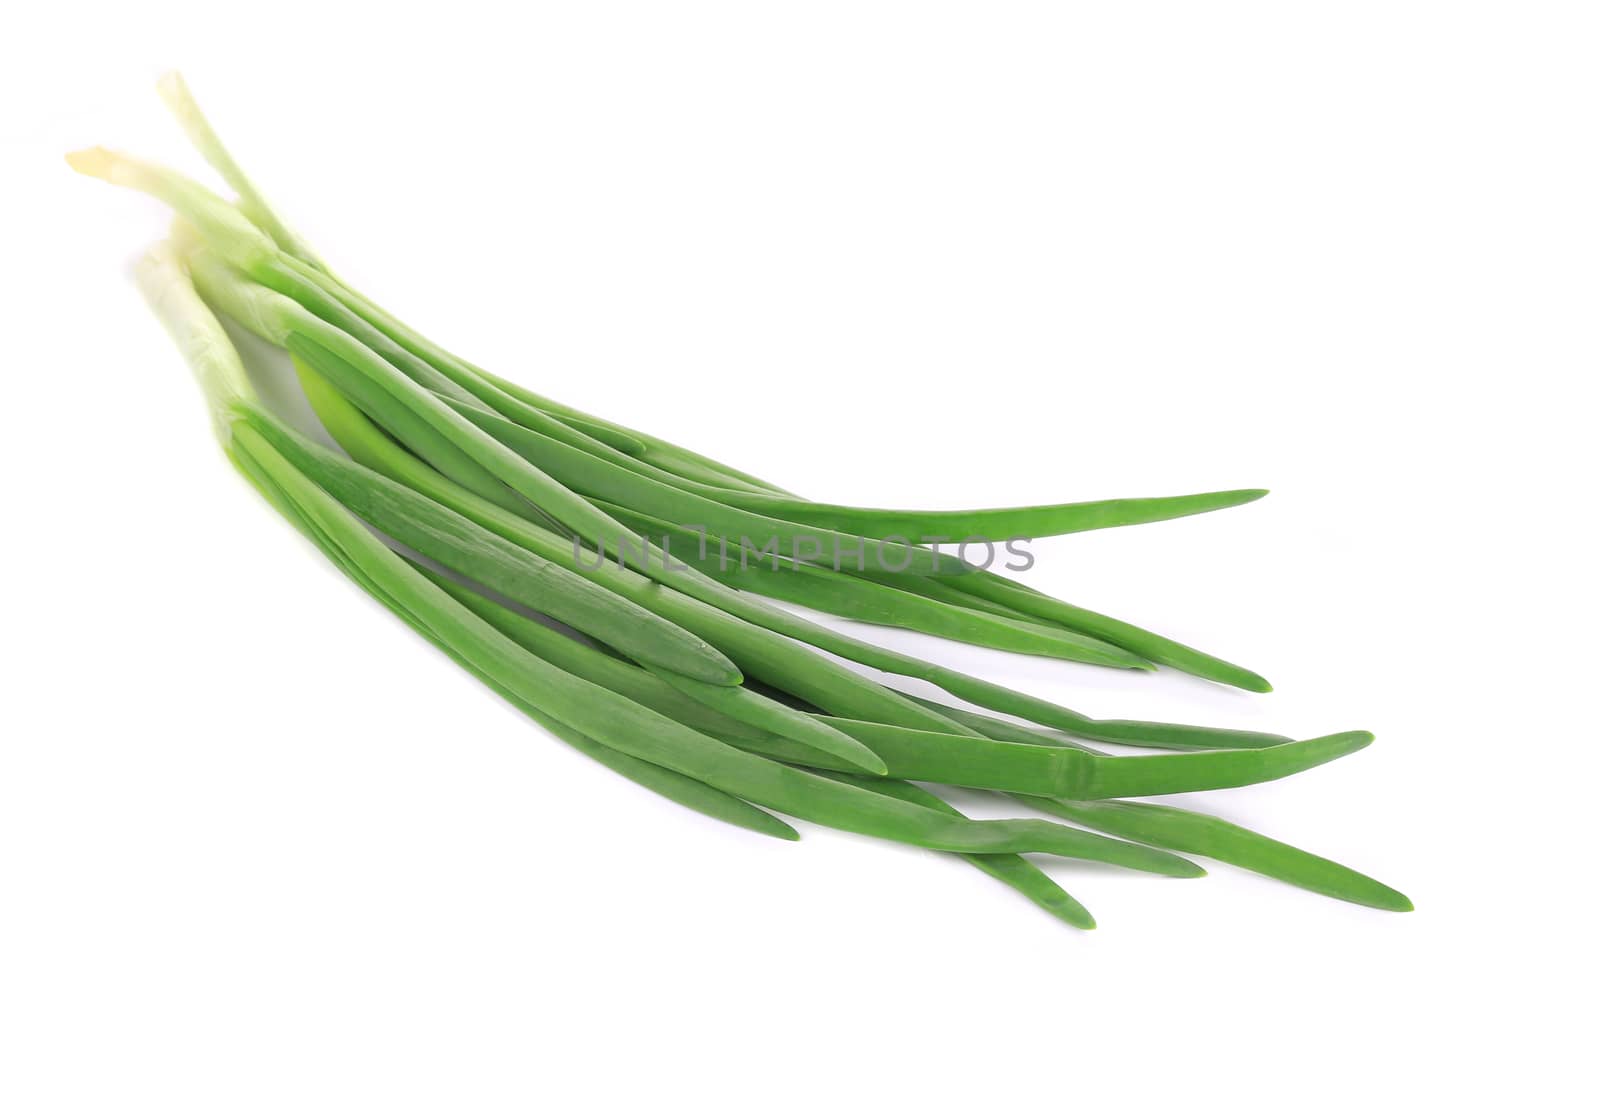 Spring onions. Isolated on a white background.